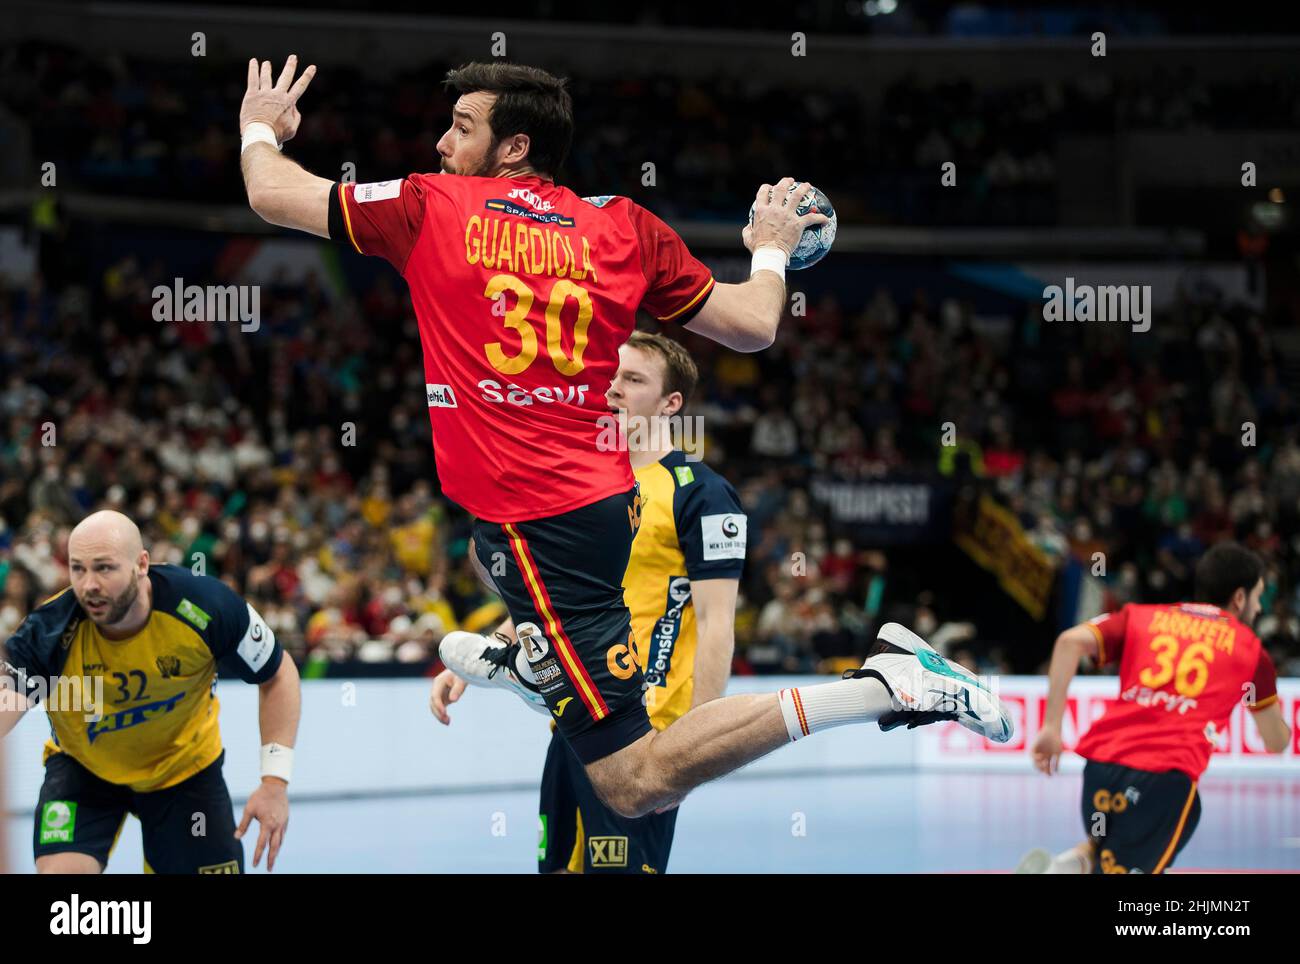 Budapest, Hungary, 30th January 2022. Gedeon Guardiola Villaplana of Spain shoots on goal during the Men's EHF EURO 2022, Final Match match between Sweden v Spain in Budapest, Hungary. January 30, 2022. Credit: Nikola Krstic/Alamy Stock Photo